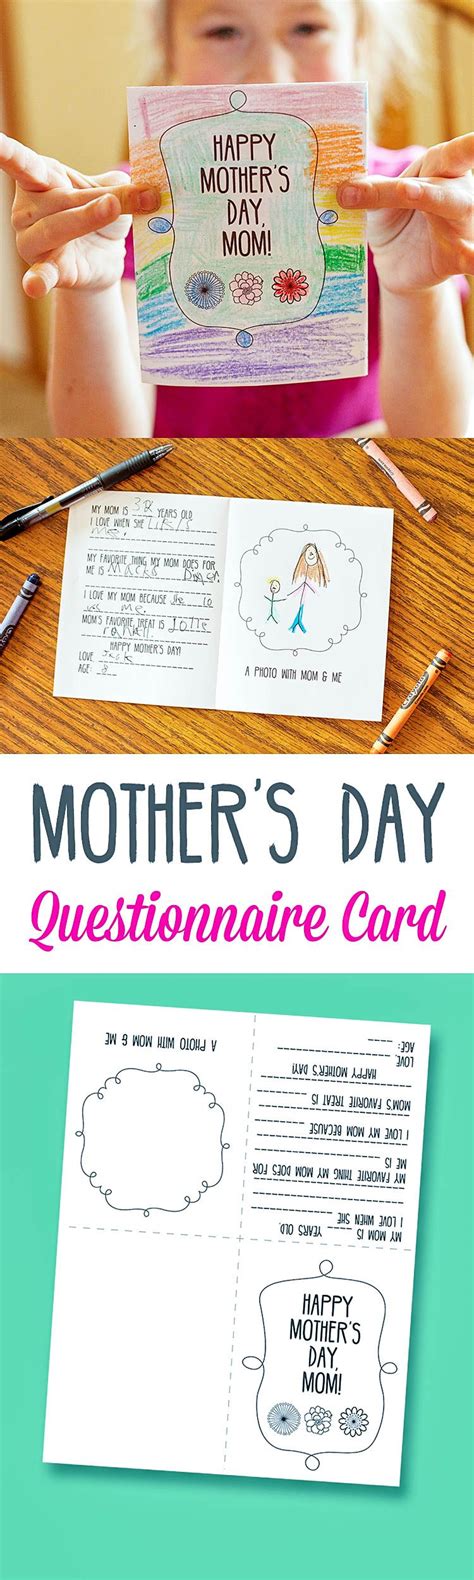 mothers day questionnaire card lil luna mothers day